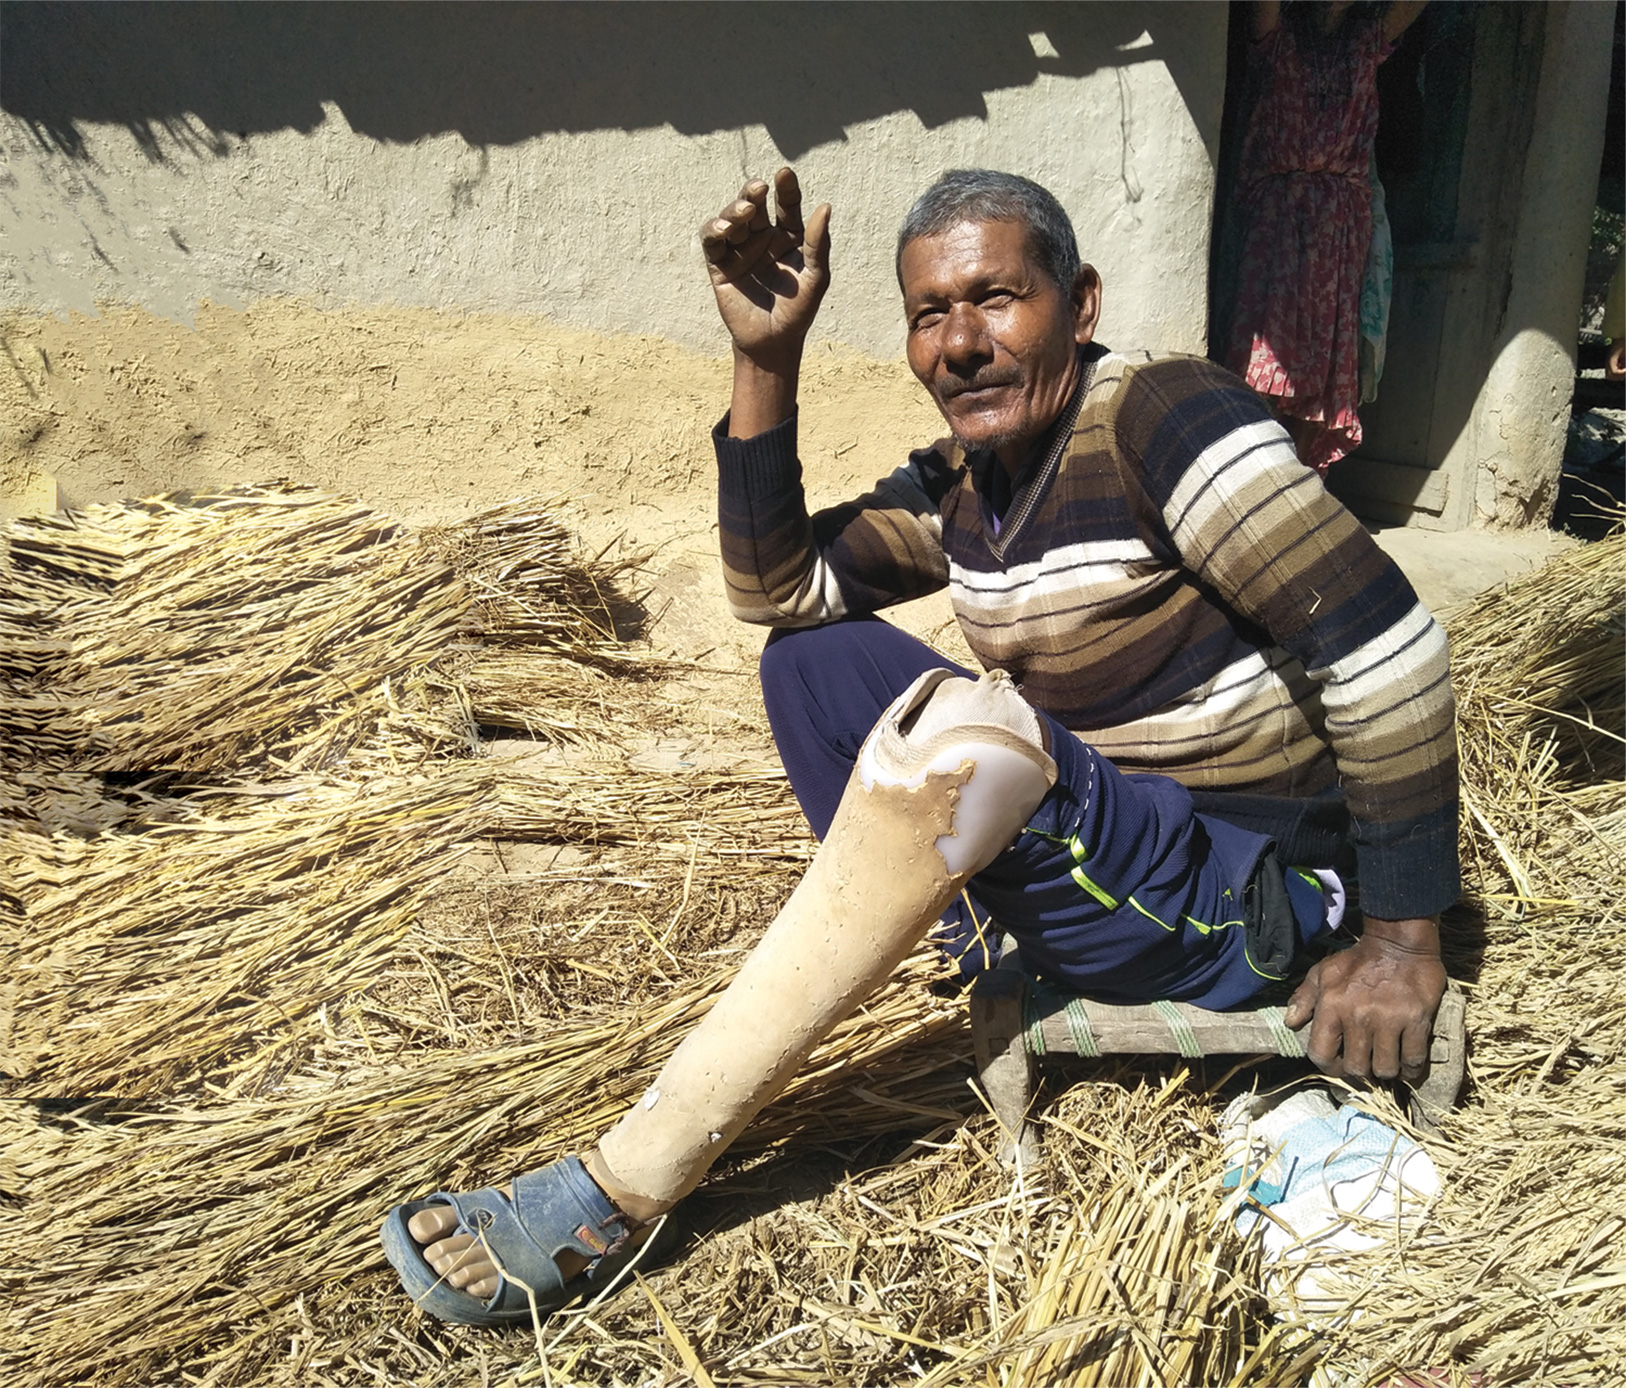 A man seated on straw with a prosthetic leg